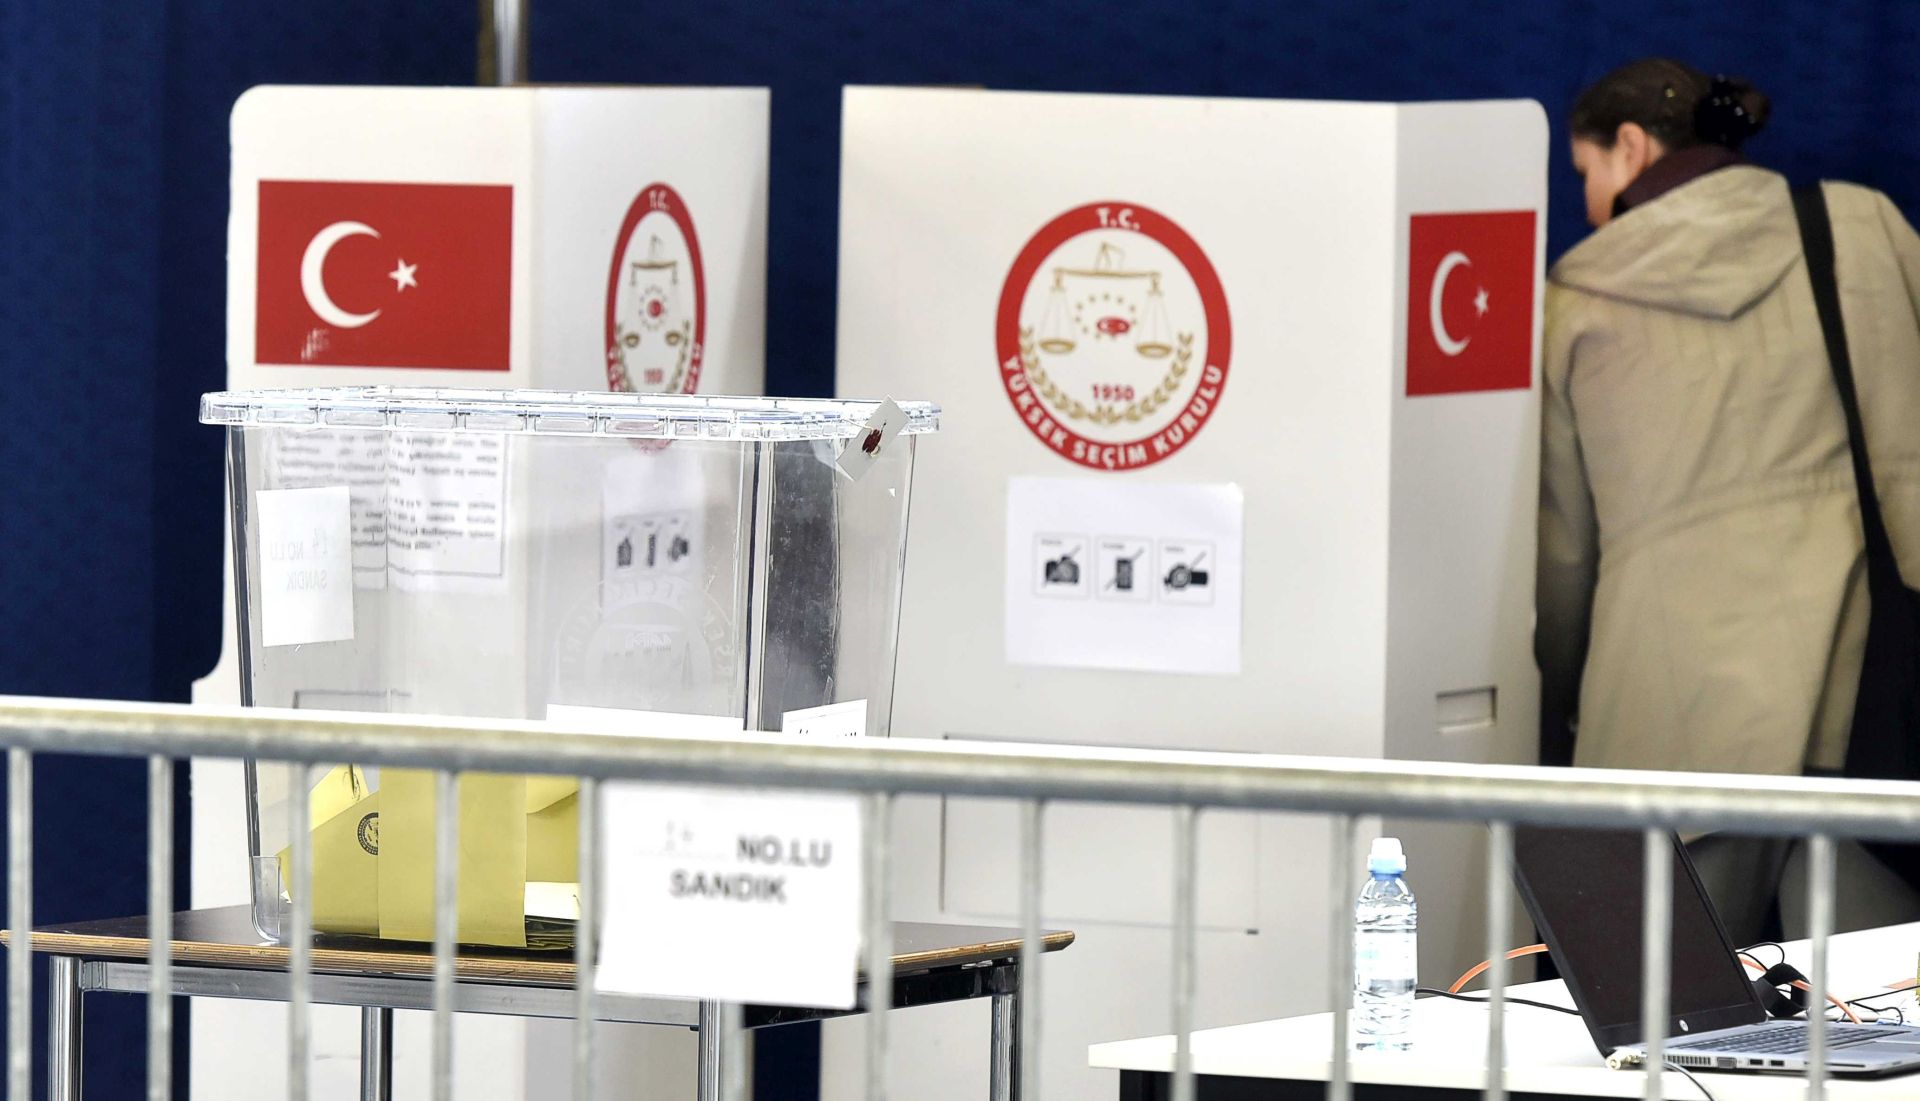 epa05889646 A Turkish voter casts her ballot at the polling station for the Turkish referendum in the Amsterdam RAI, the Netherlands, 05 April 2017. Tens of thousands of Turkish Dutch vote for the referendum on the controversial amendment of the Constitution of Turkey. The amendment, passed by Turkish parliament on 21 January, would change the country's parliamentarian system of governance into a presidential one, which the opposition denounced as giving more power to Turkish president Recep Tayyip Erdogan.  EPA/EVERT ELZINGA